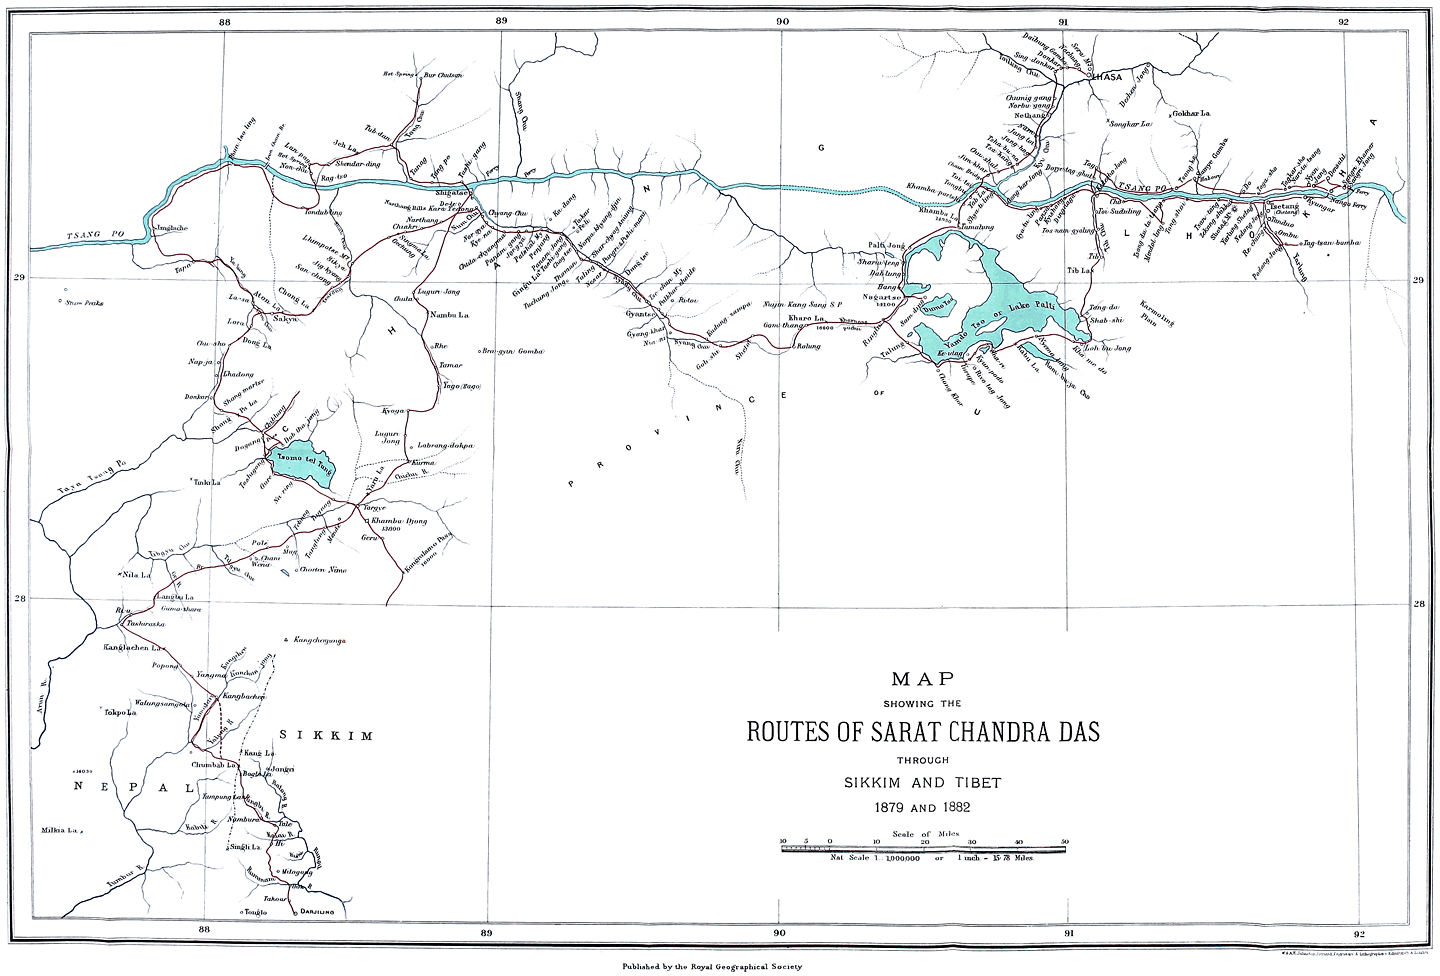 MAP SHOWING THE ROUTES OF SARAT CHANDRA DAS THROUGH SIKKIM AND TIBET 1879 AND 1882